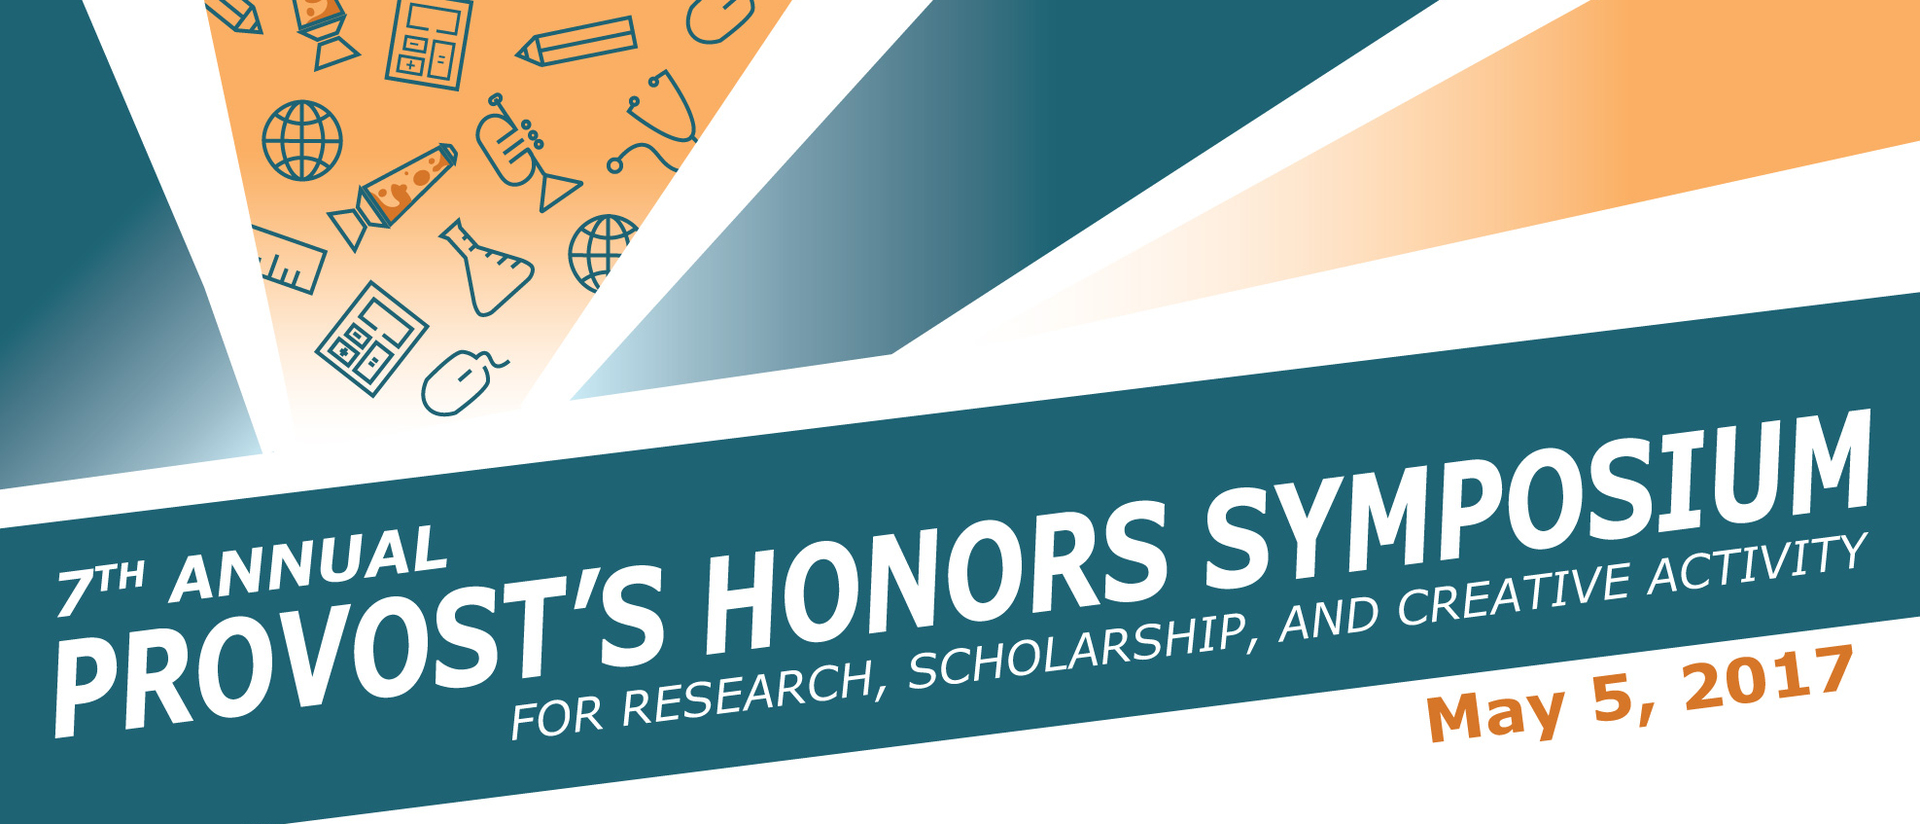 7th Annual Provost's Honors Symposium